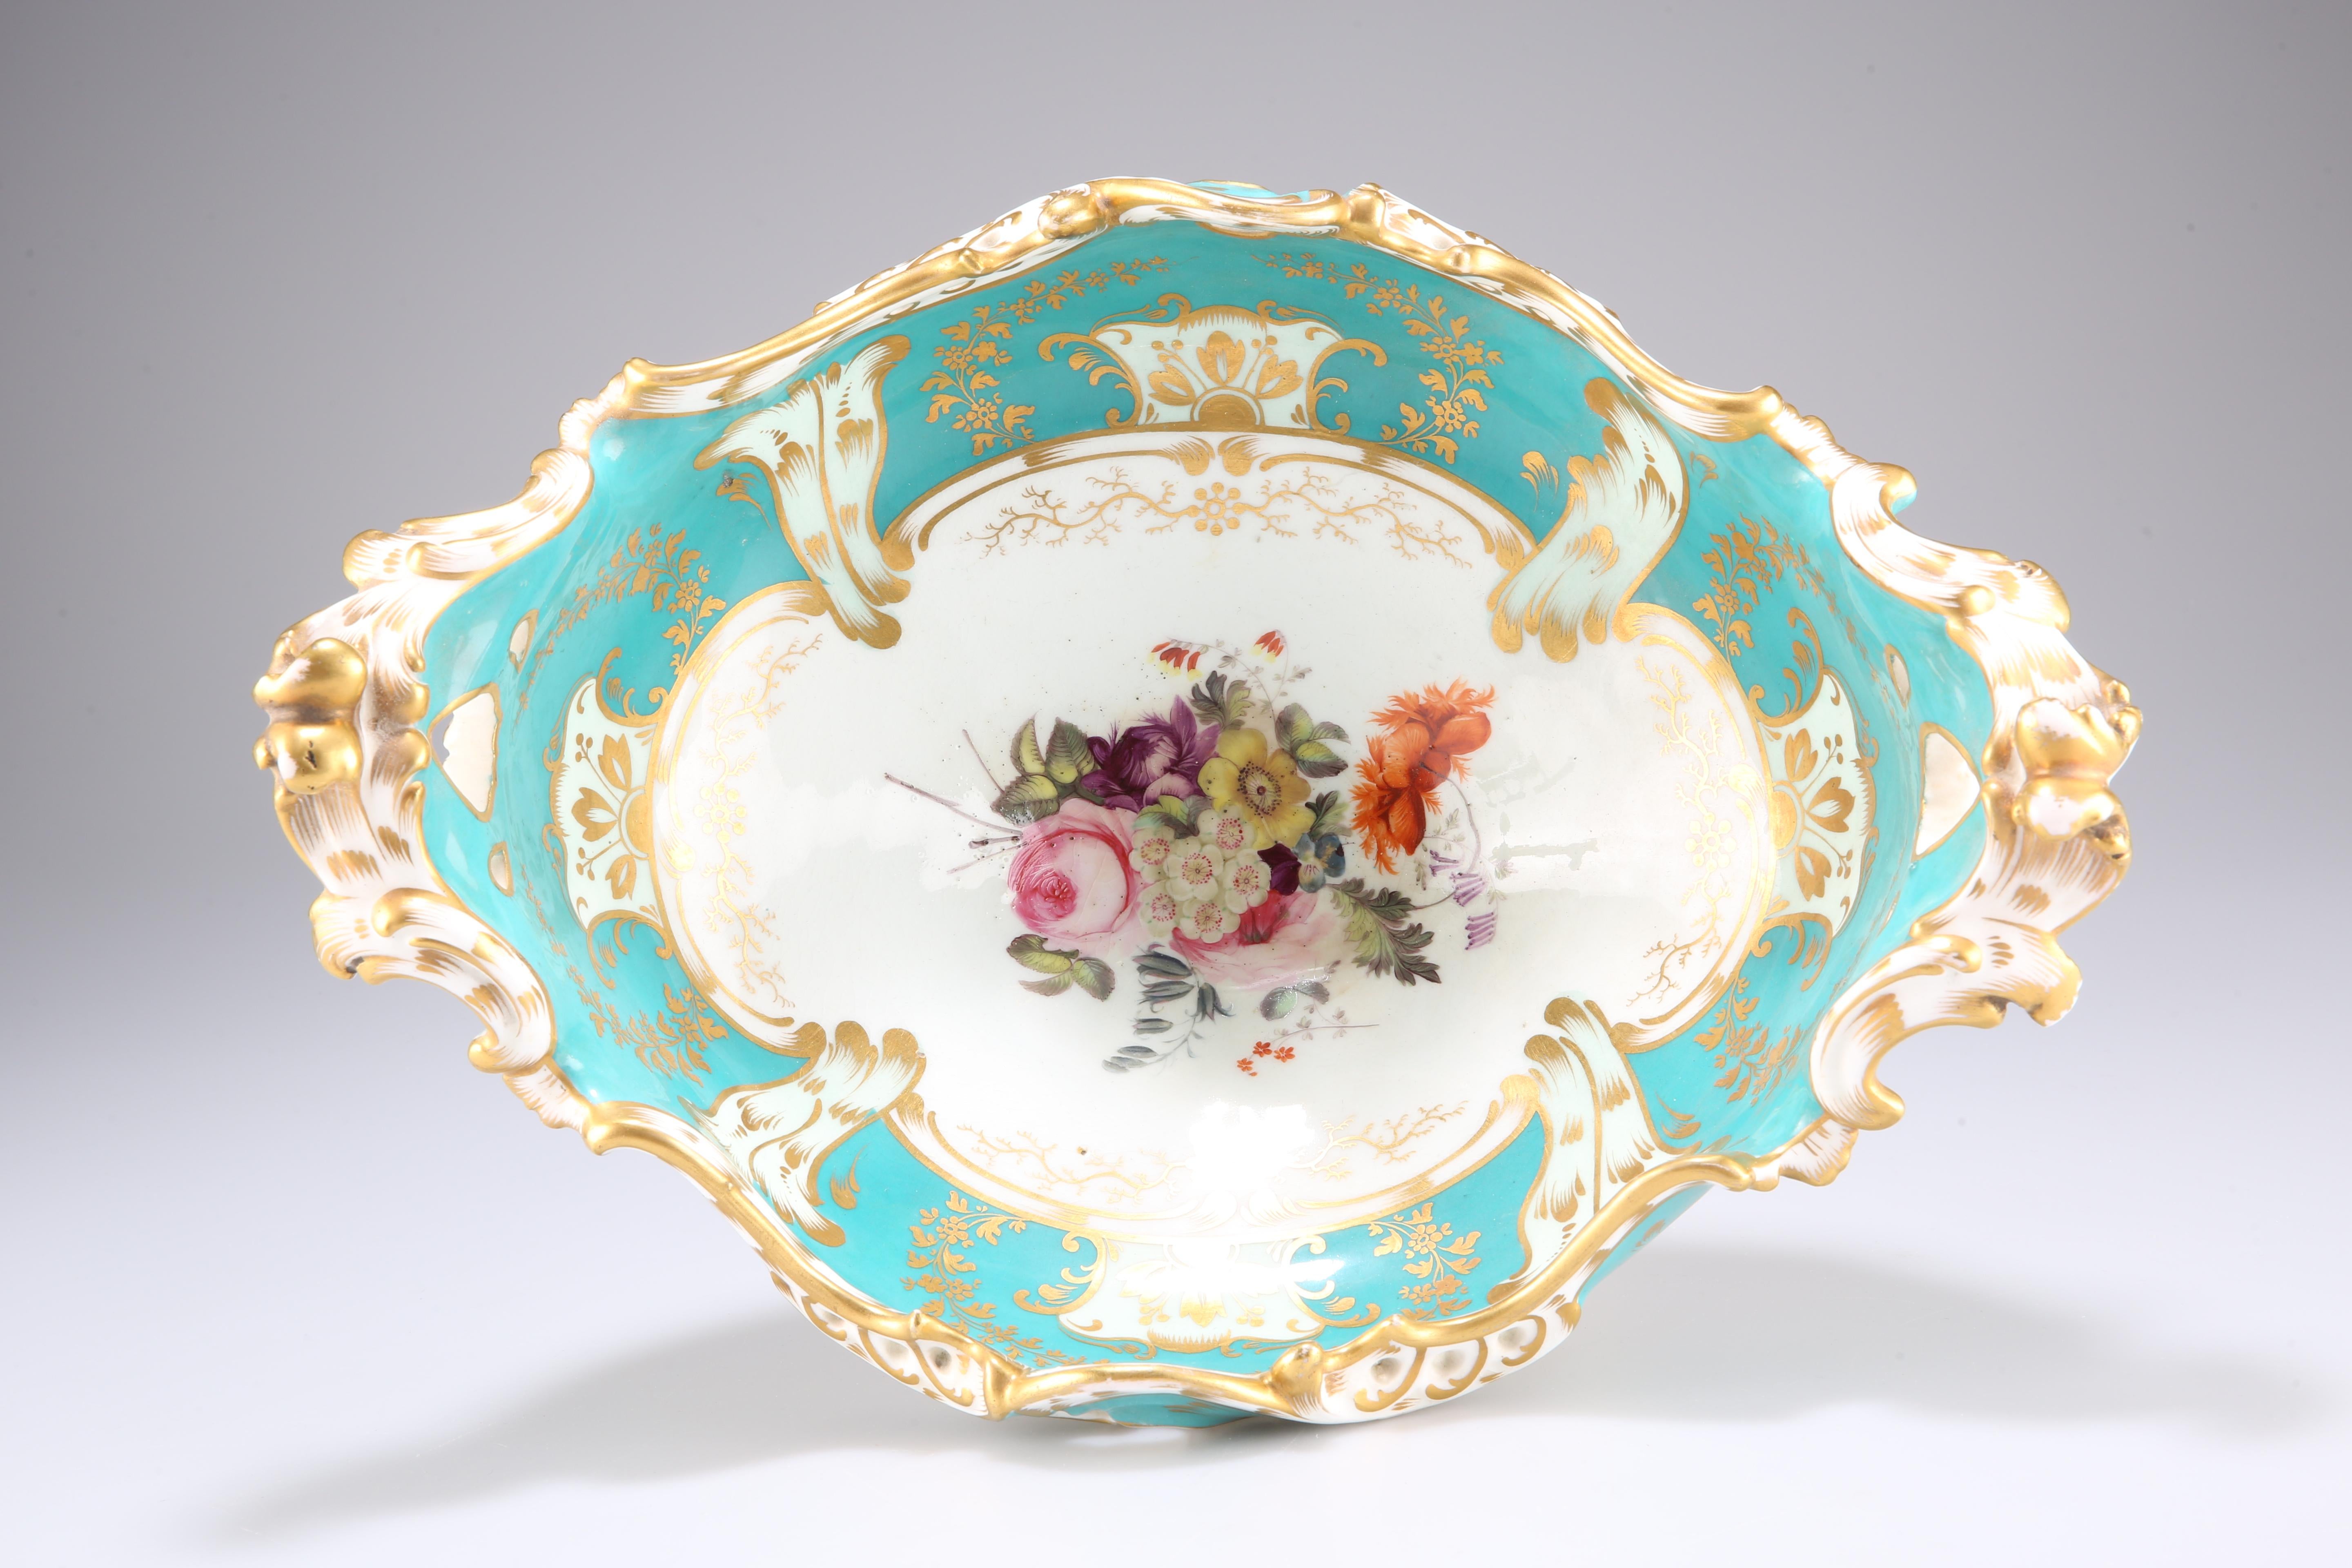 A Coalport English stunning gilded centrepiece dates back to mid 19th century. The shaped oval bowl with pierced edge features all hand painted flower studies, raised on a similarly decorated pierced foot. Its unusual color makes an impressive